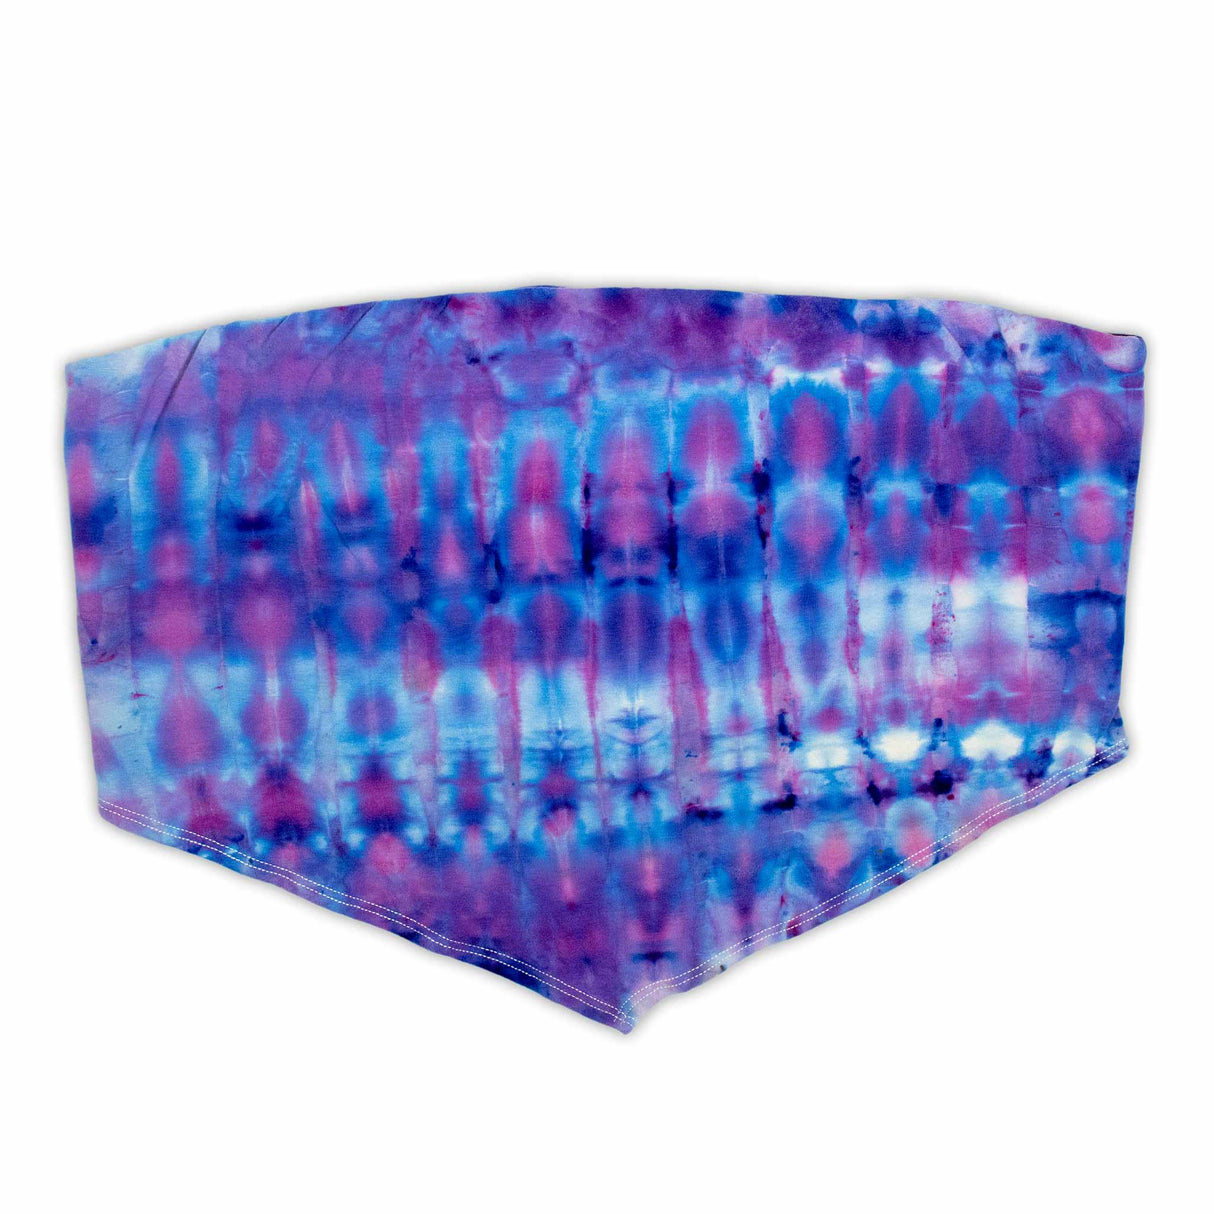 Stylish women's bandeau top with a distinctive ice-dyed pleated effect, blending blue and purple hues in an organic pattern.